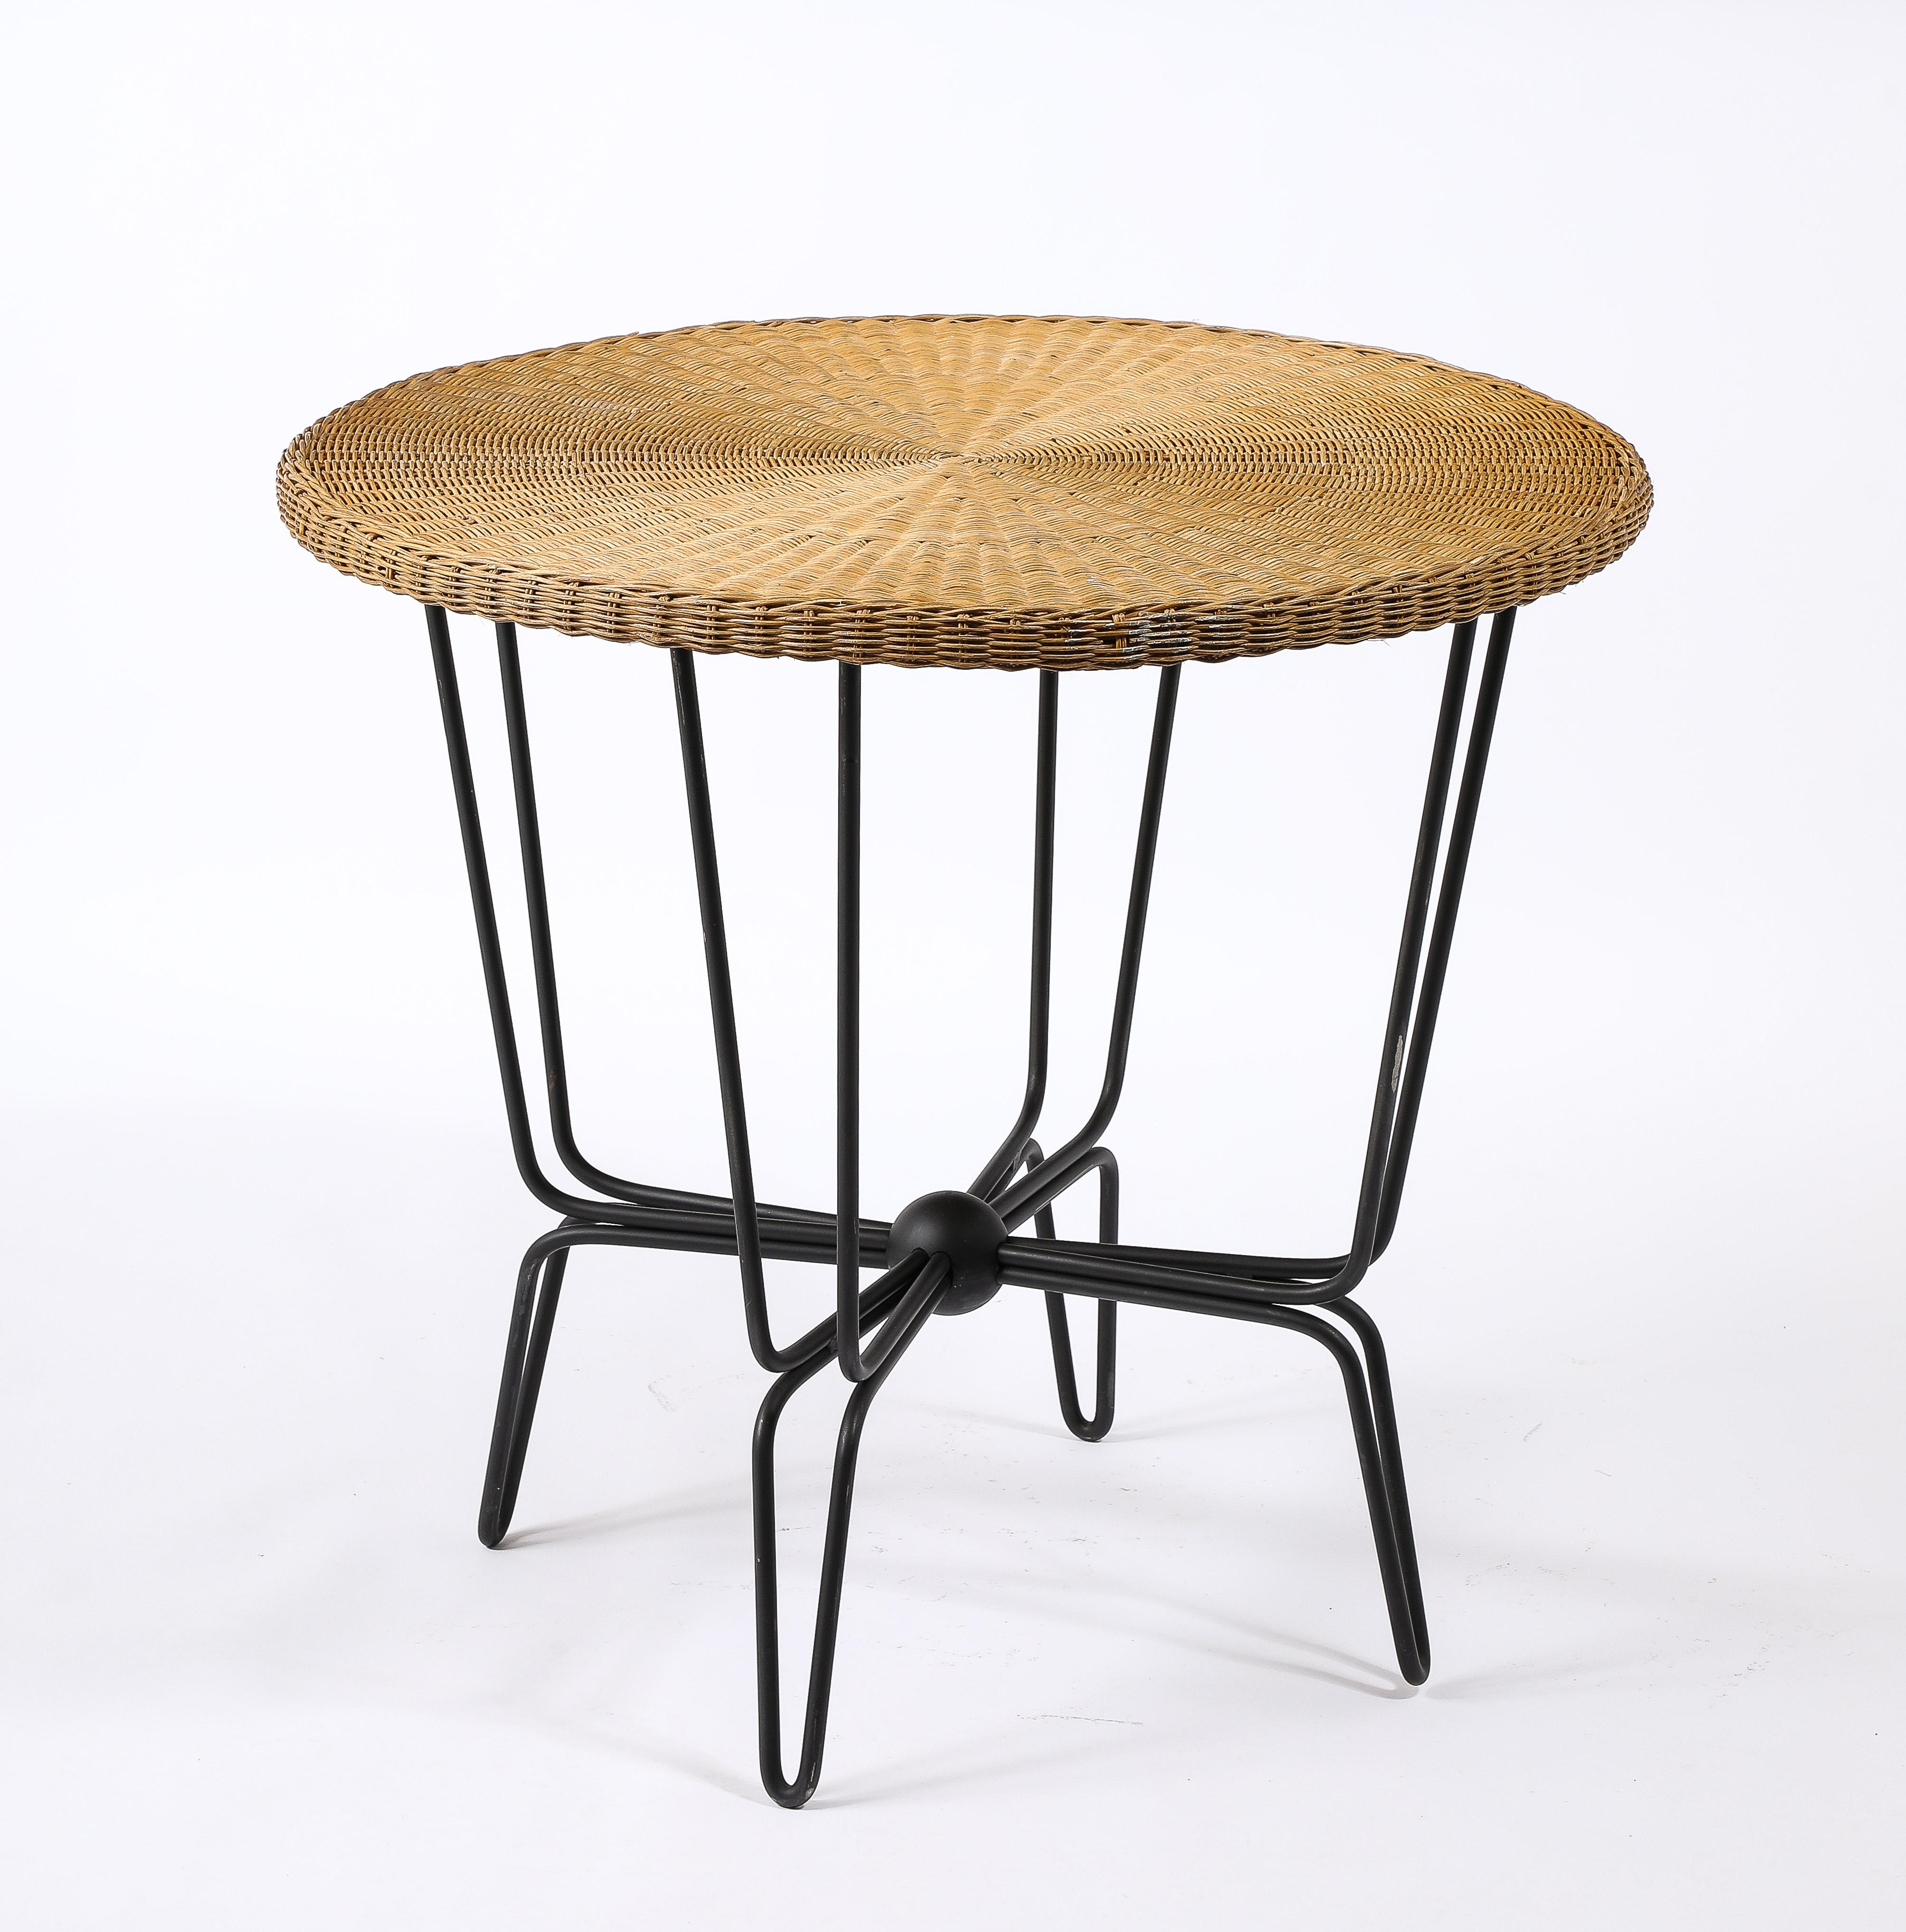 Mathieu Mategot Wrought Iron & Wicker Table, France 1950's For Sale 4